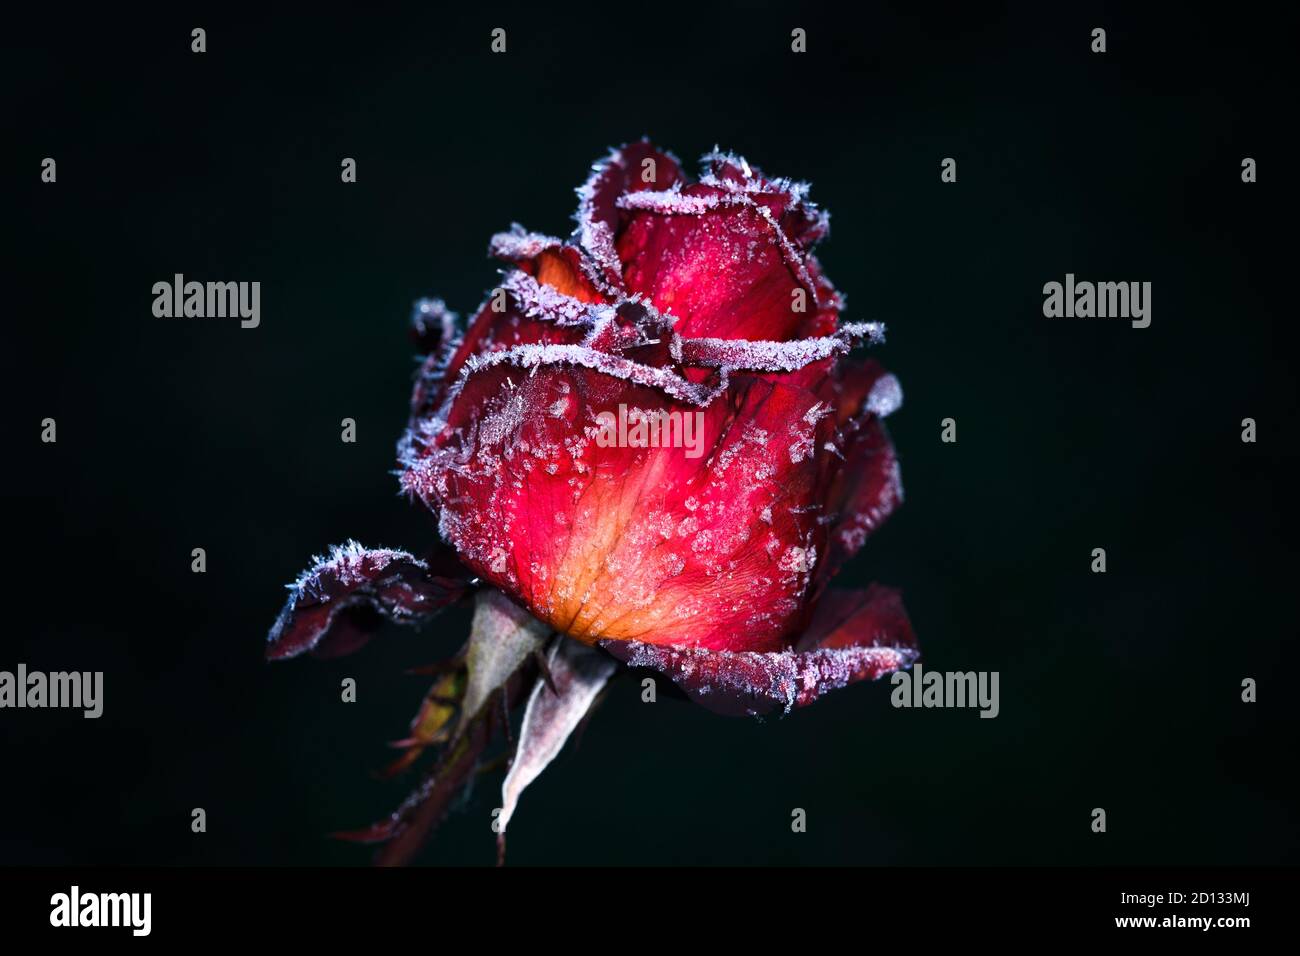 The bud of a red rose, covered with frost on a cold morning, on a dark background Stock Photo